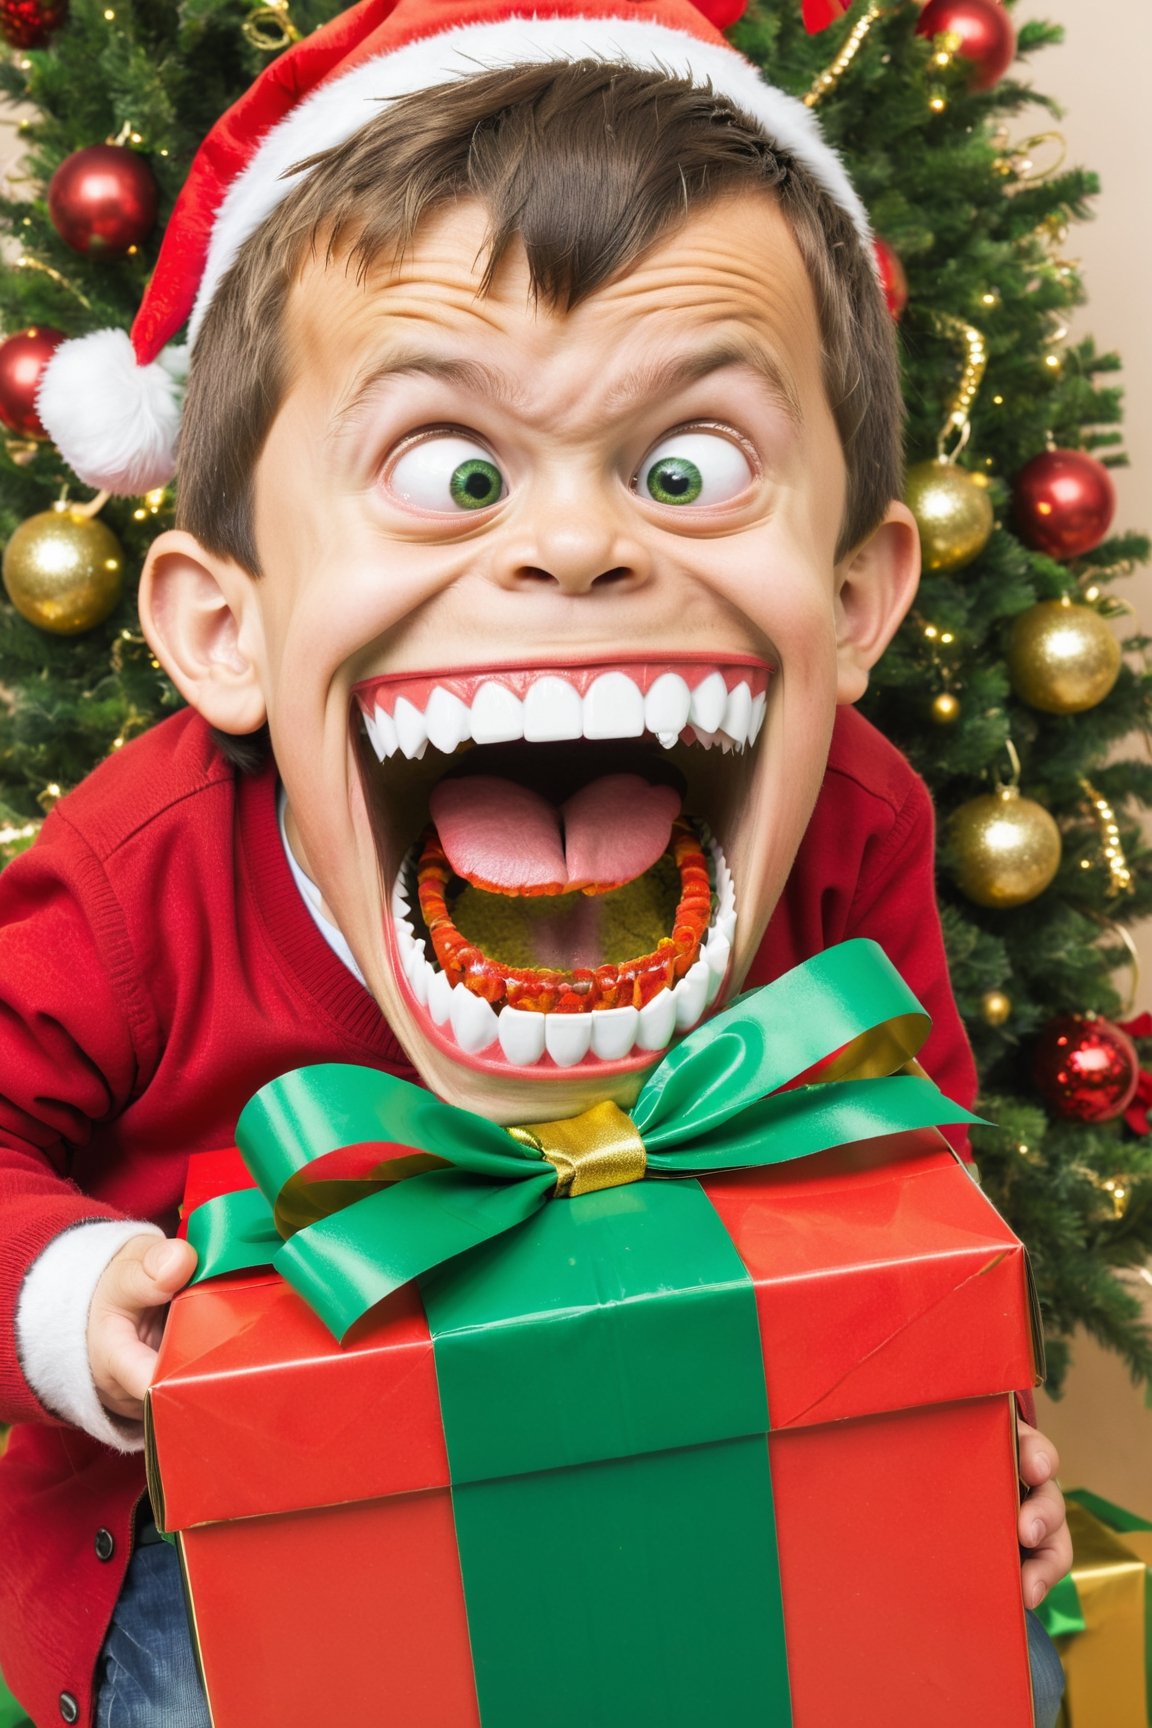 Christmas present  and little boy, red cardboard box, green and gold bow, large teeth, gaping mouth, a present mimic,  ,
,PEOPShockedFace